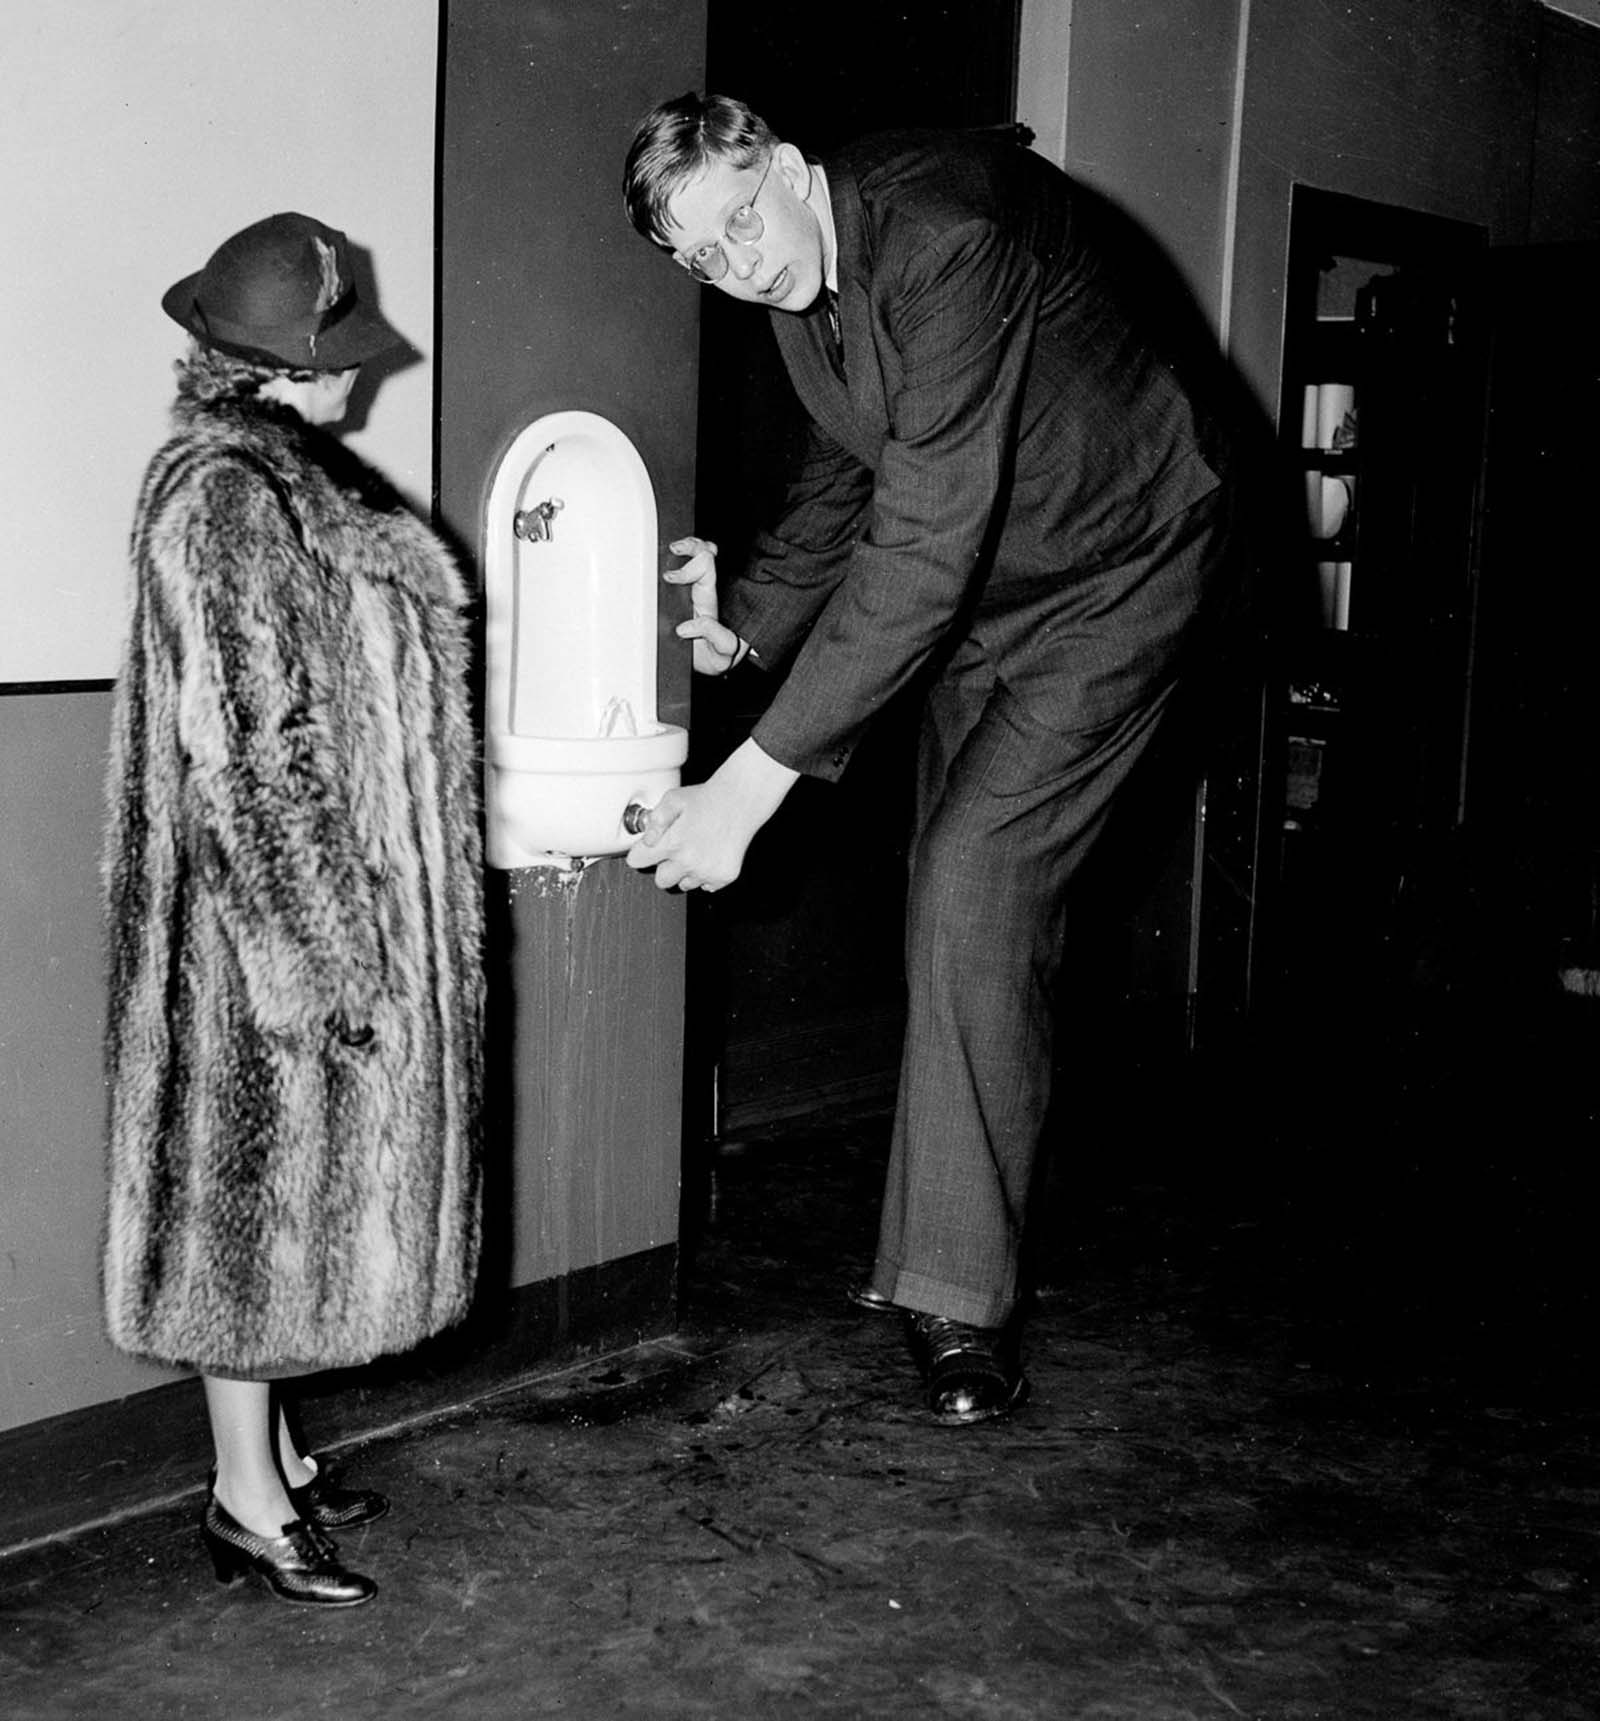 Wadlow stoops for a drink during a visit to the Daily News offices in New York, 1937.